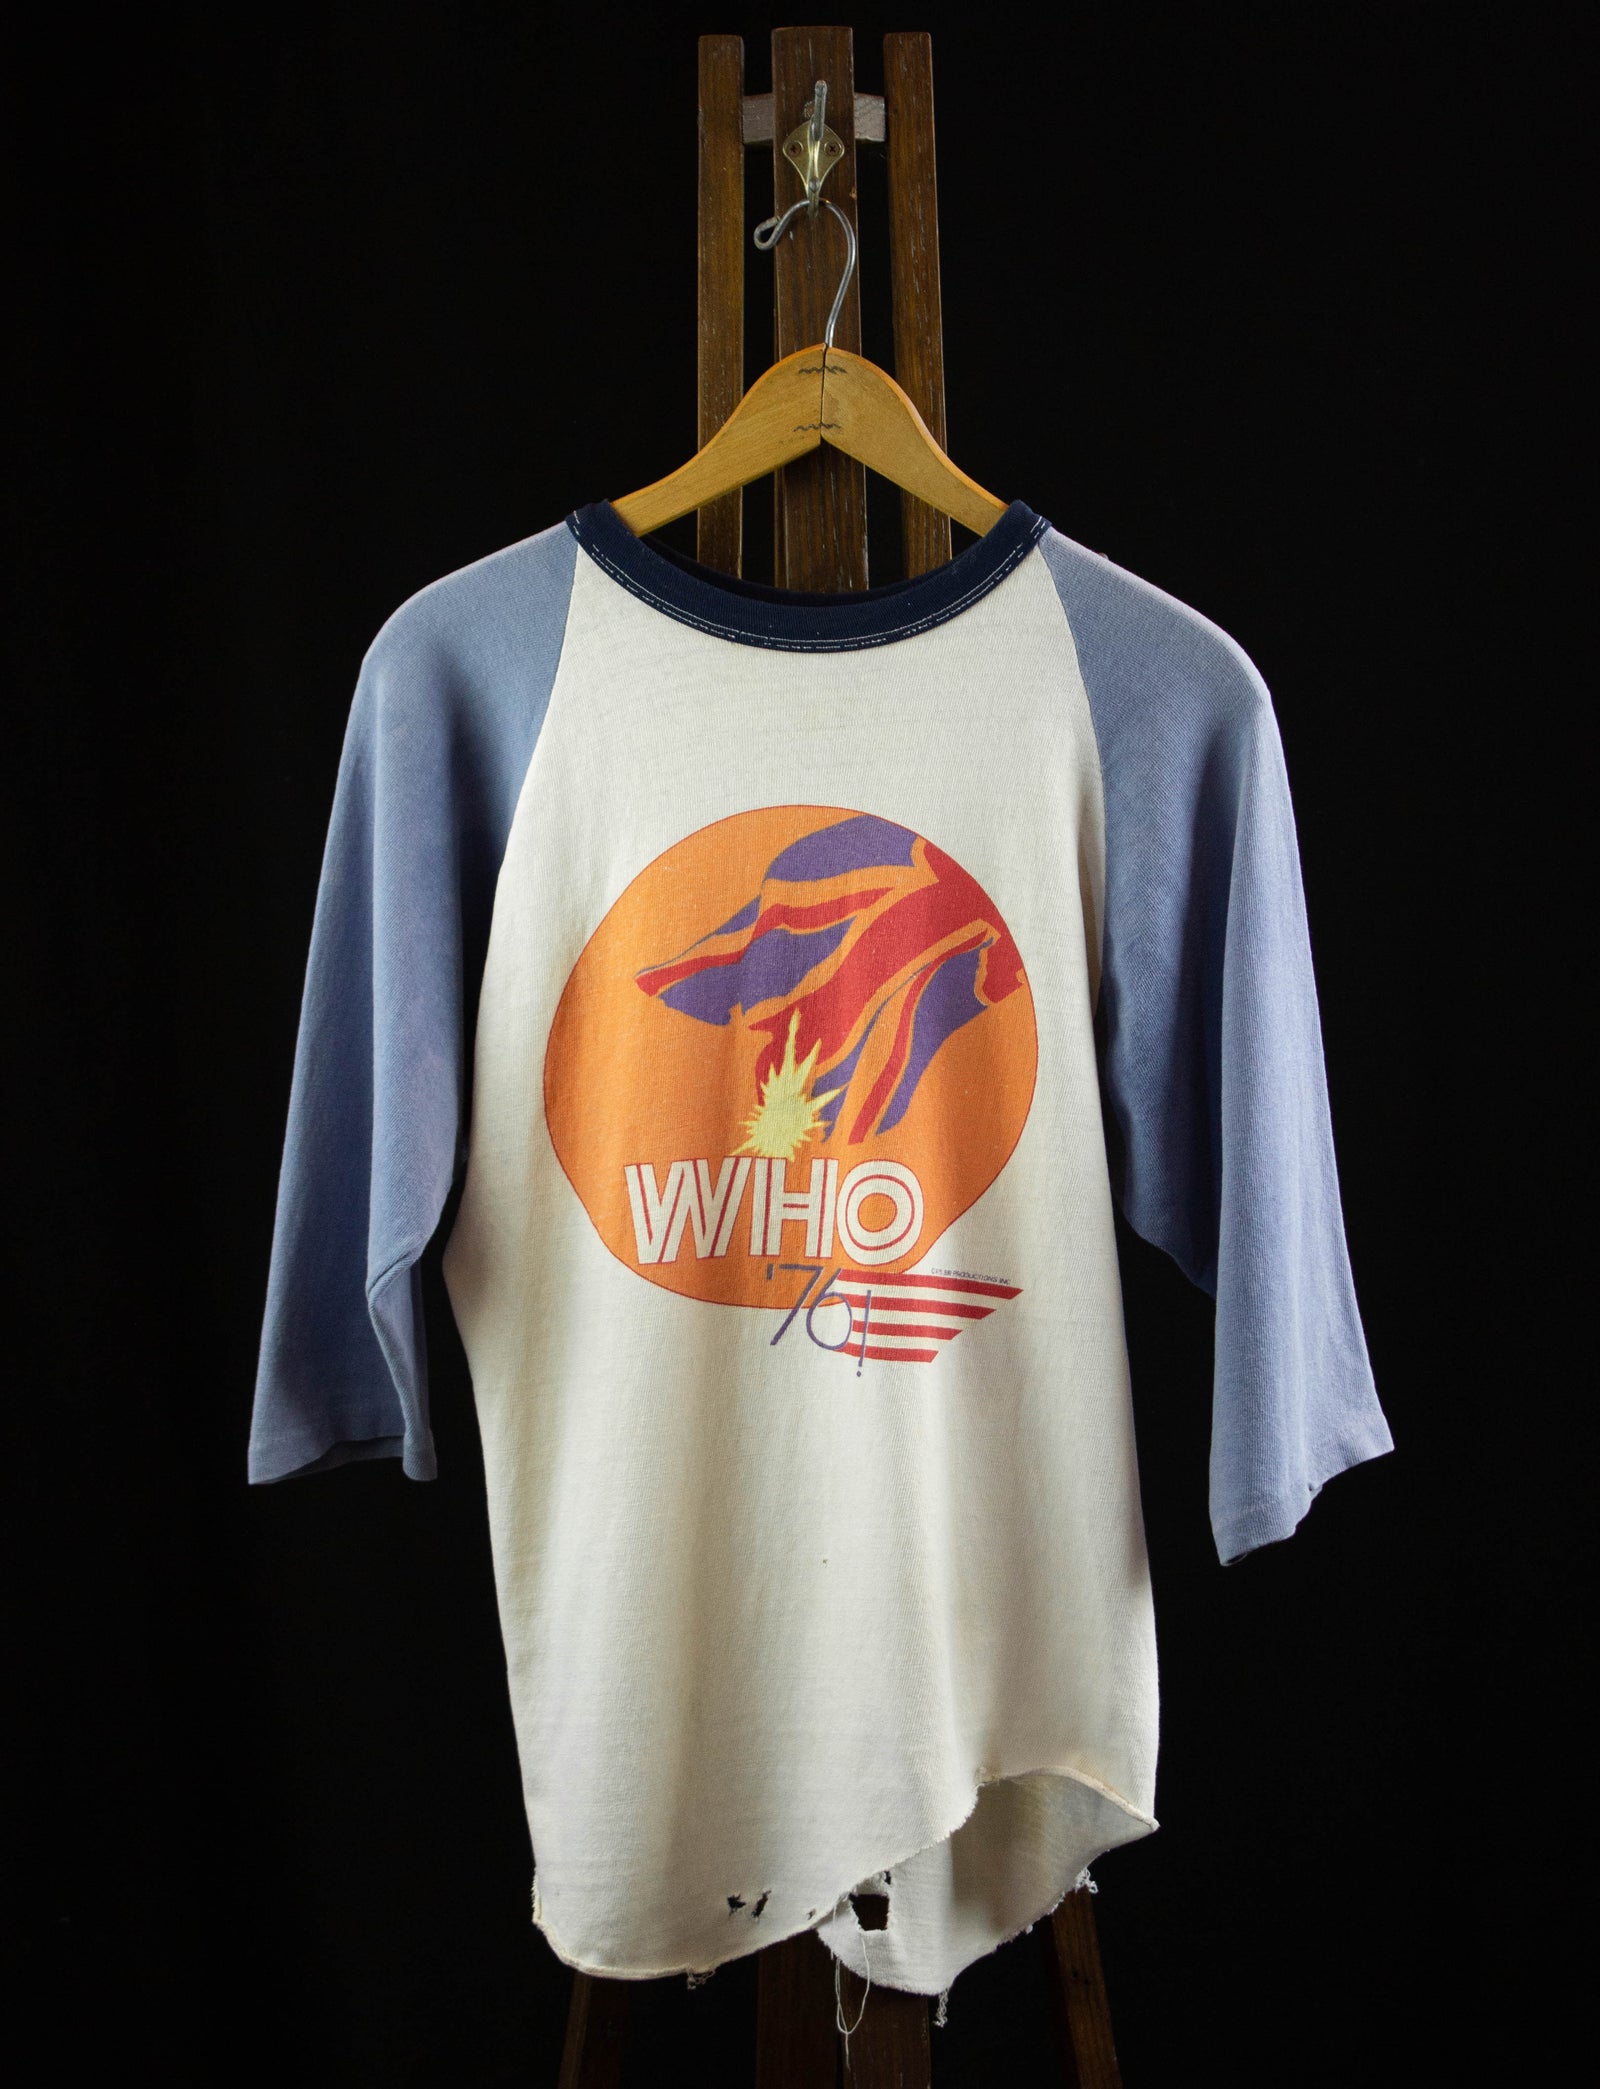 Vintage The Who Concert T Shirt 1976 Spark Graphic White and Blue Raglan Jersey Small